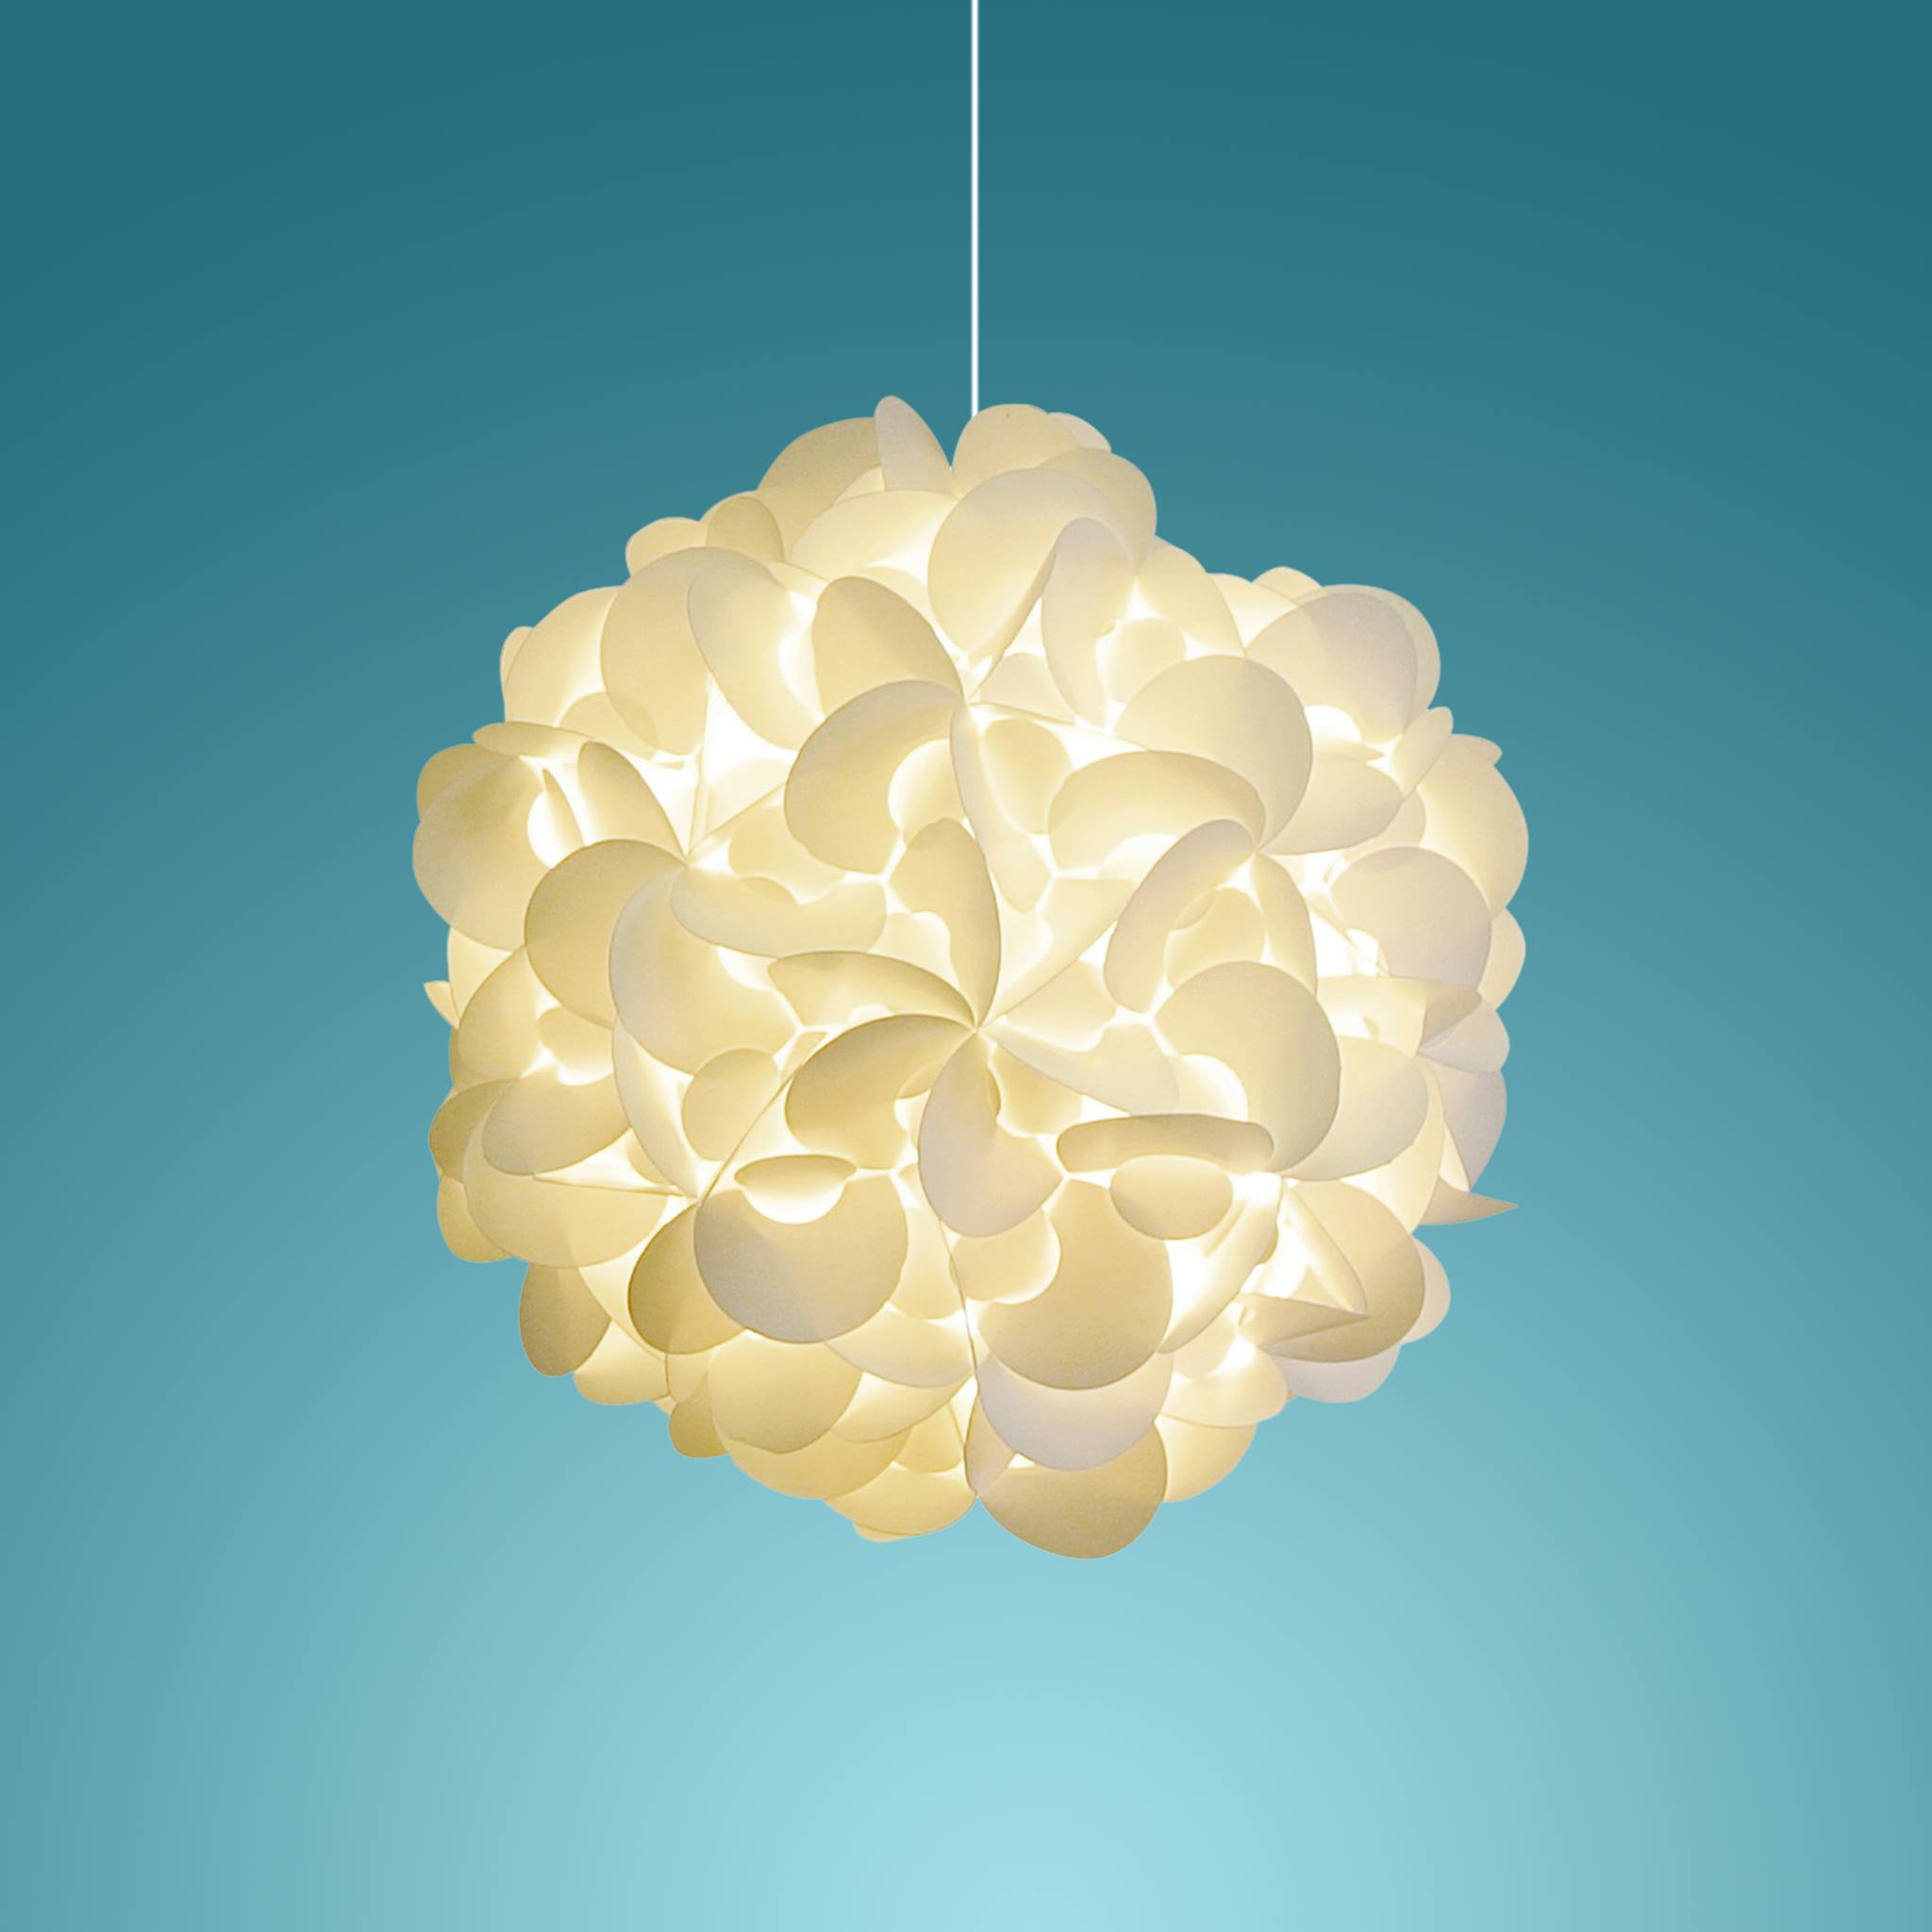 Save: $74.00 Off On Deluxe Rounds Hanging Pendant Light